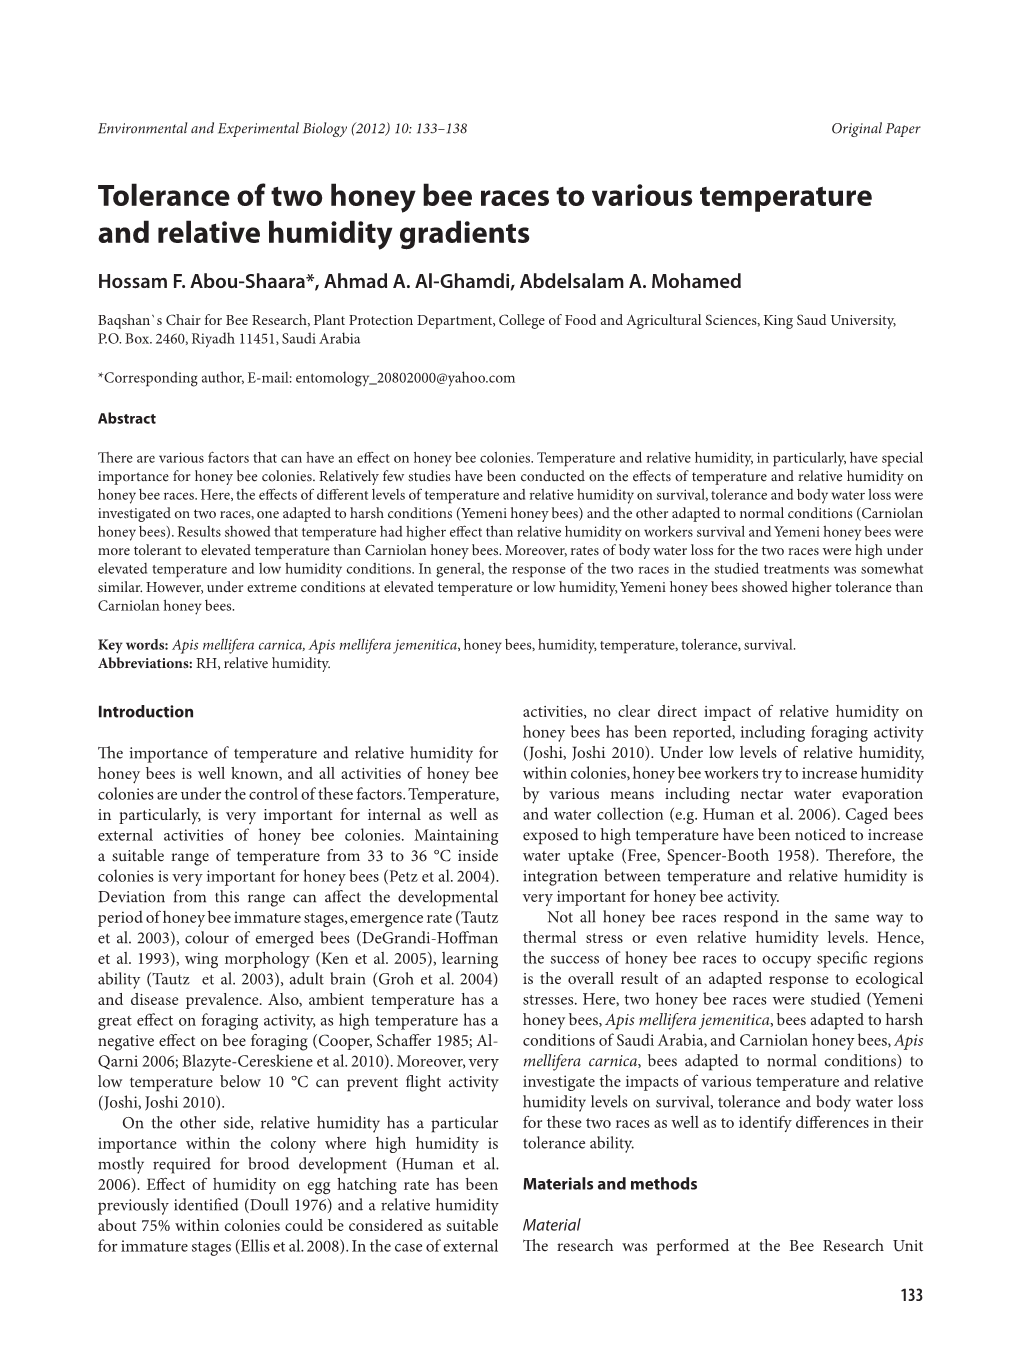 Tolerance of Two Honey Bee Races to Various Temperature and Relative Humidity Gradients